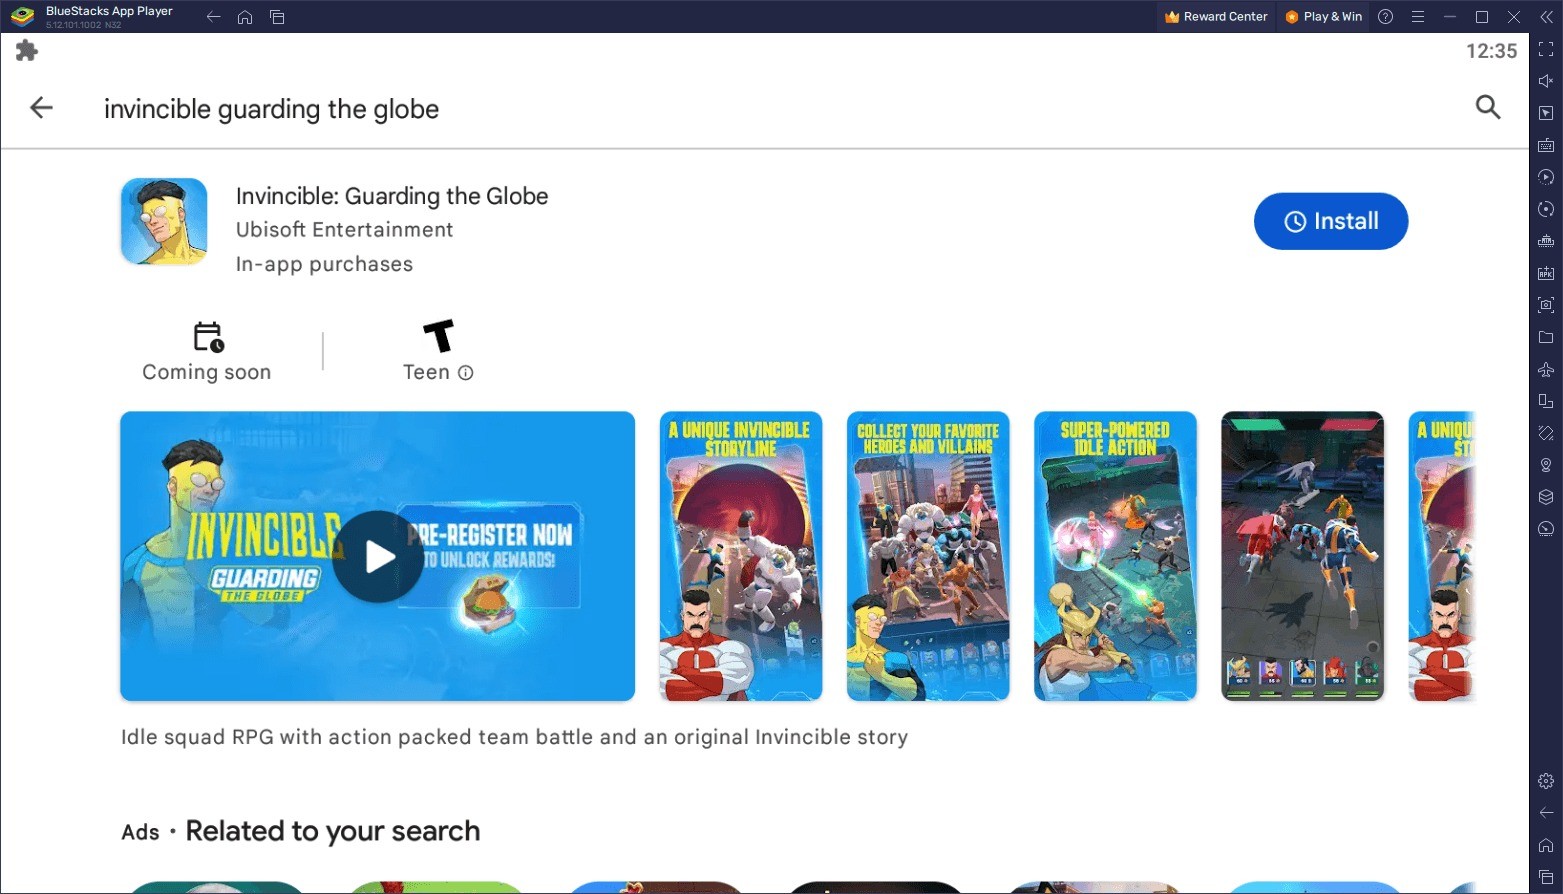 How to Download and Play Invincible: Guarding the Globe on Your PC